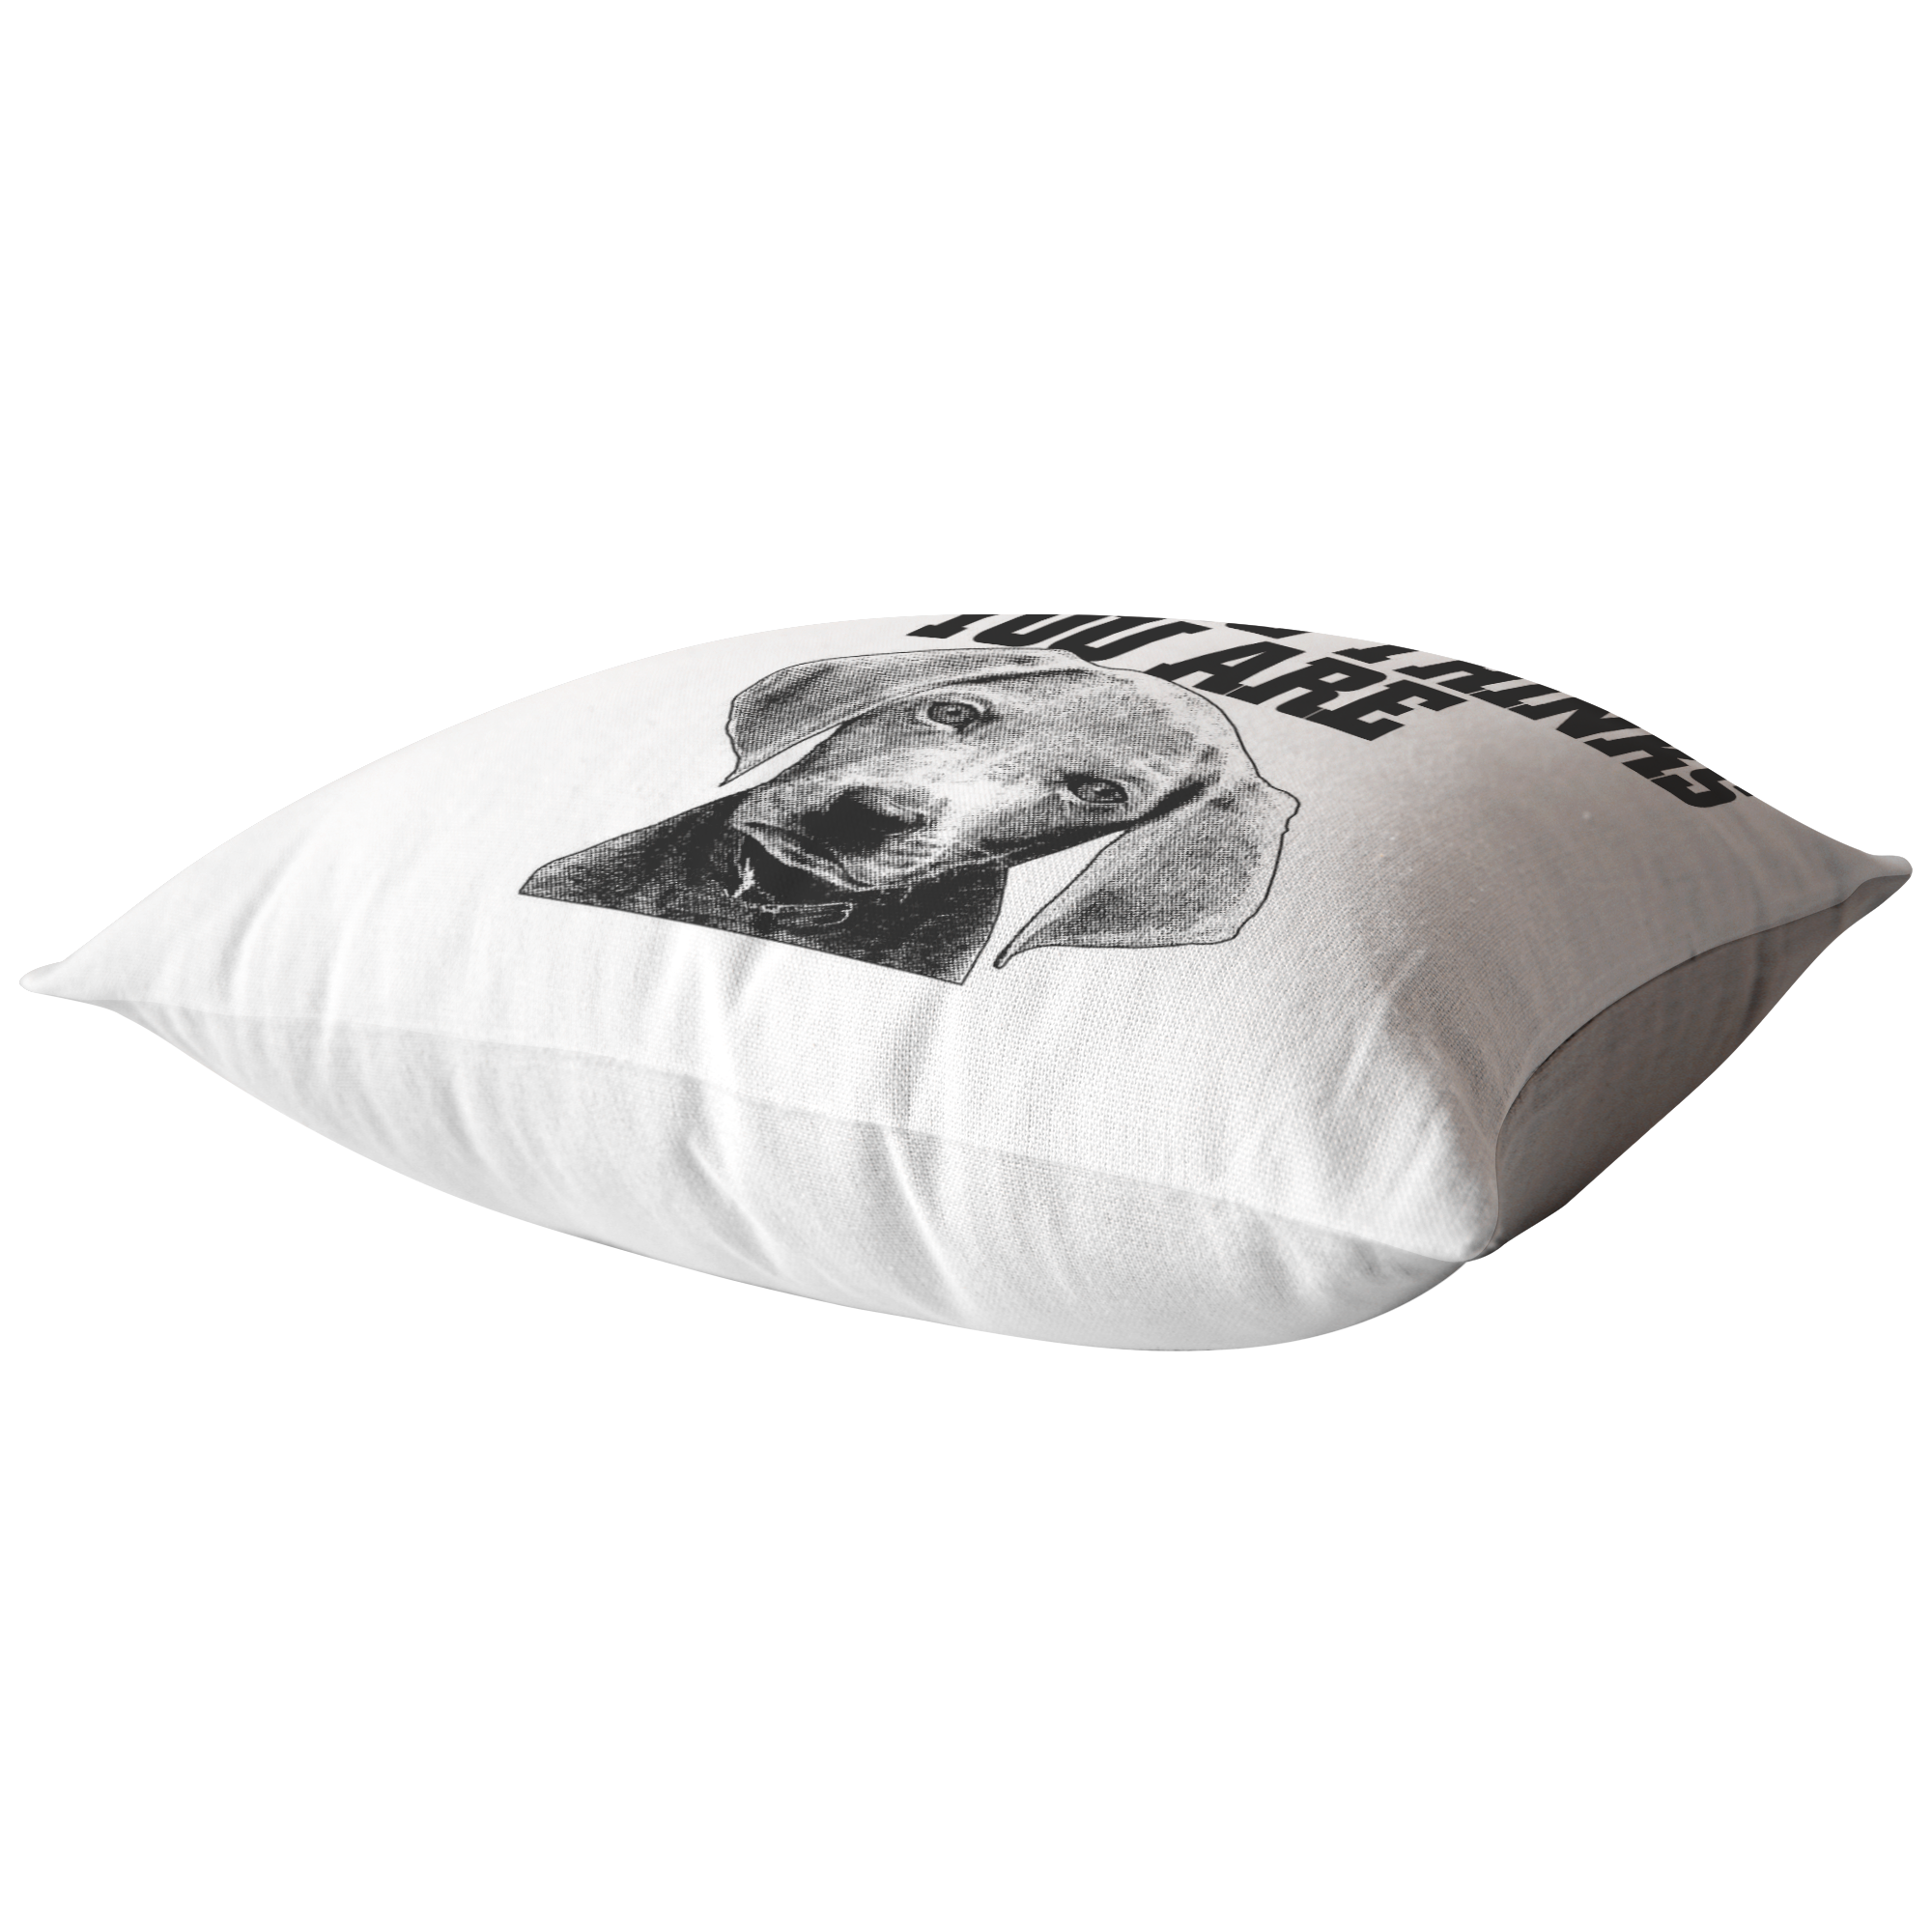 Be the person your dog thinks you are - Pillow